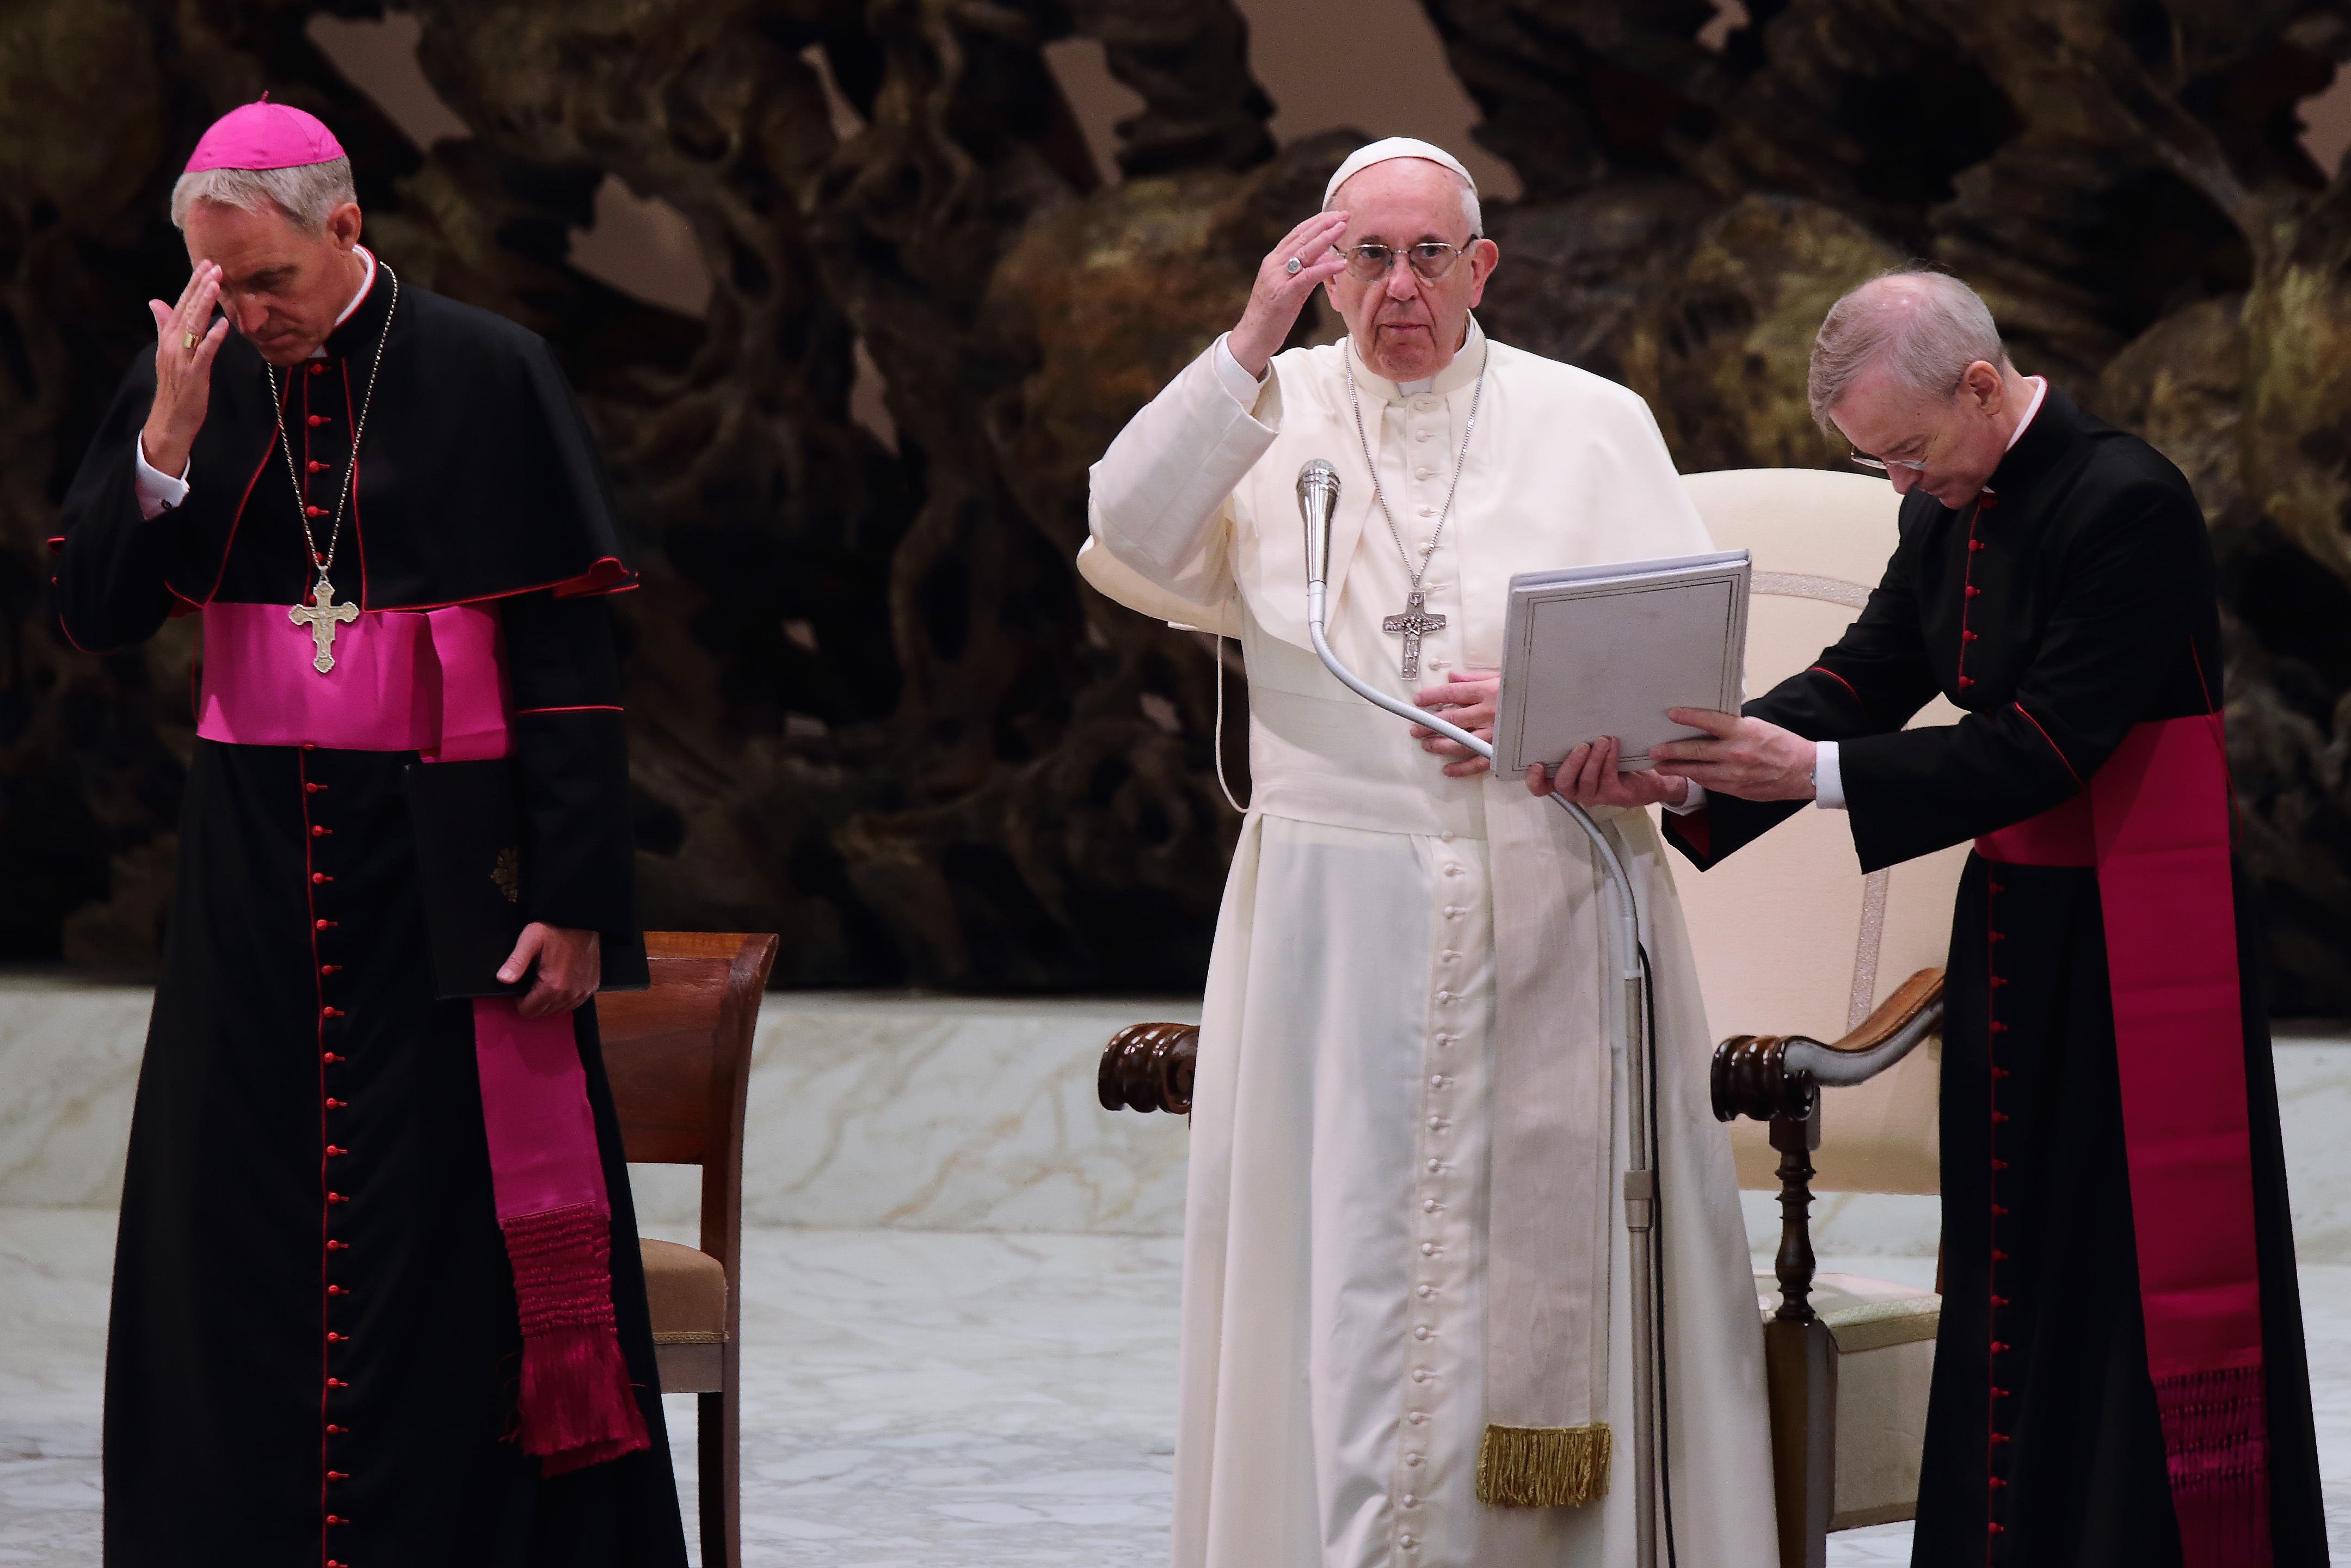 Bishop Egan asks Pope for Extraordinary Synod